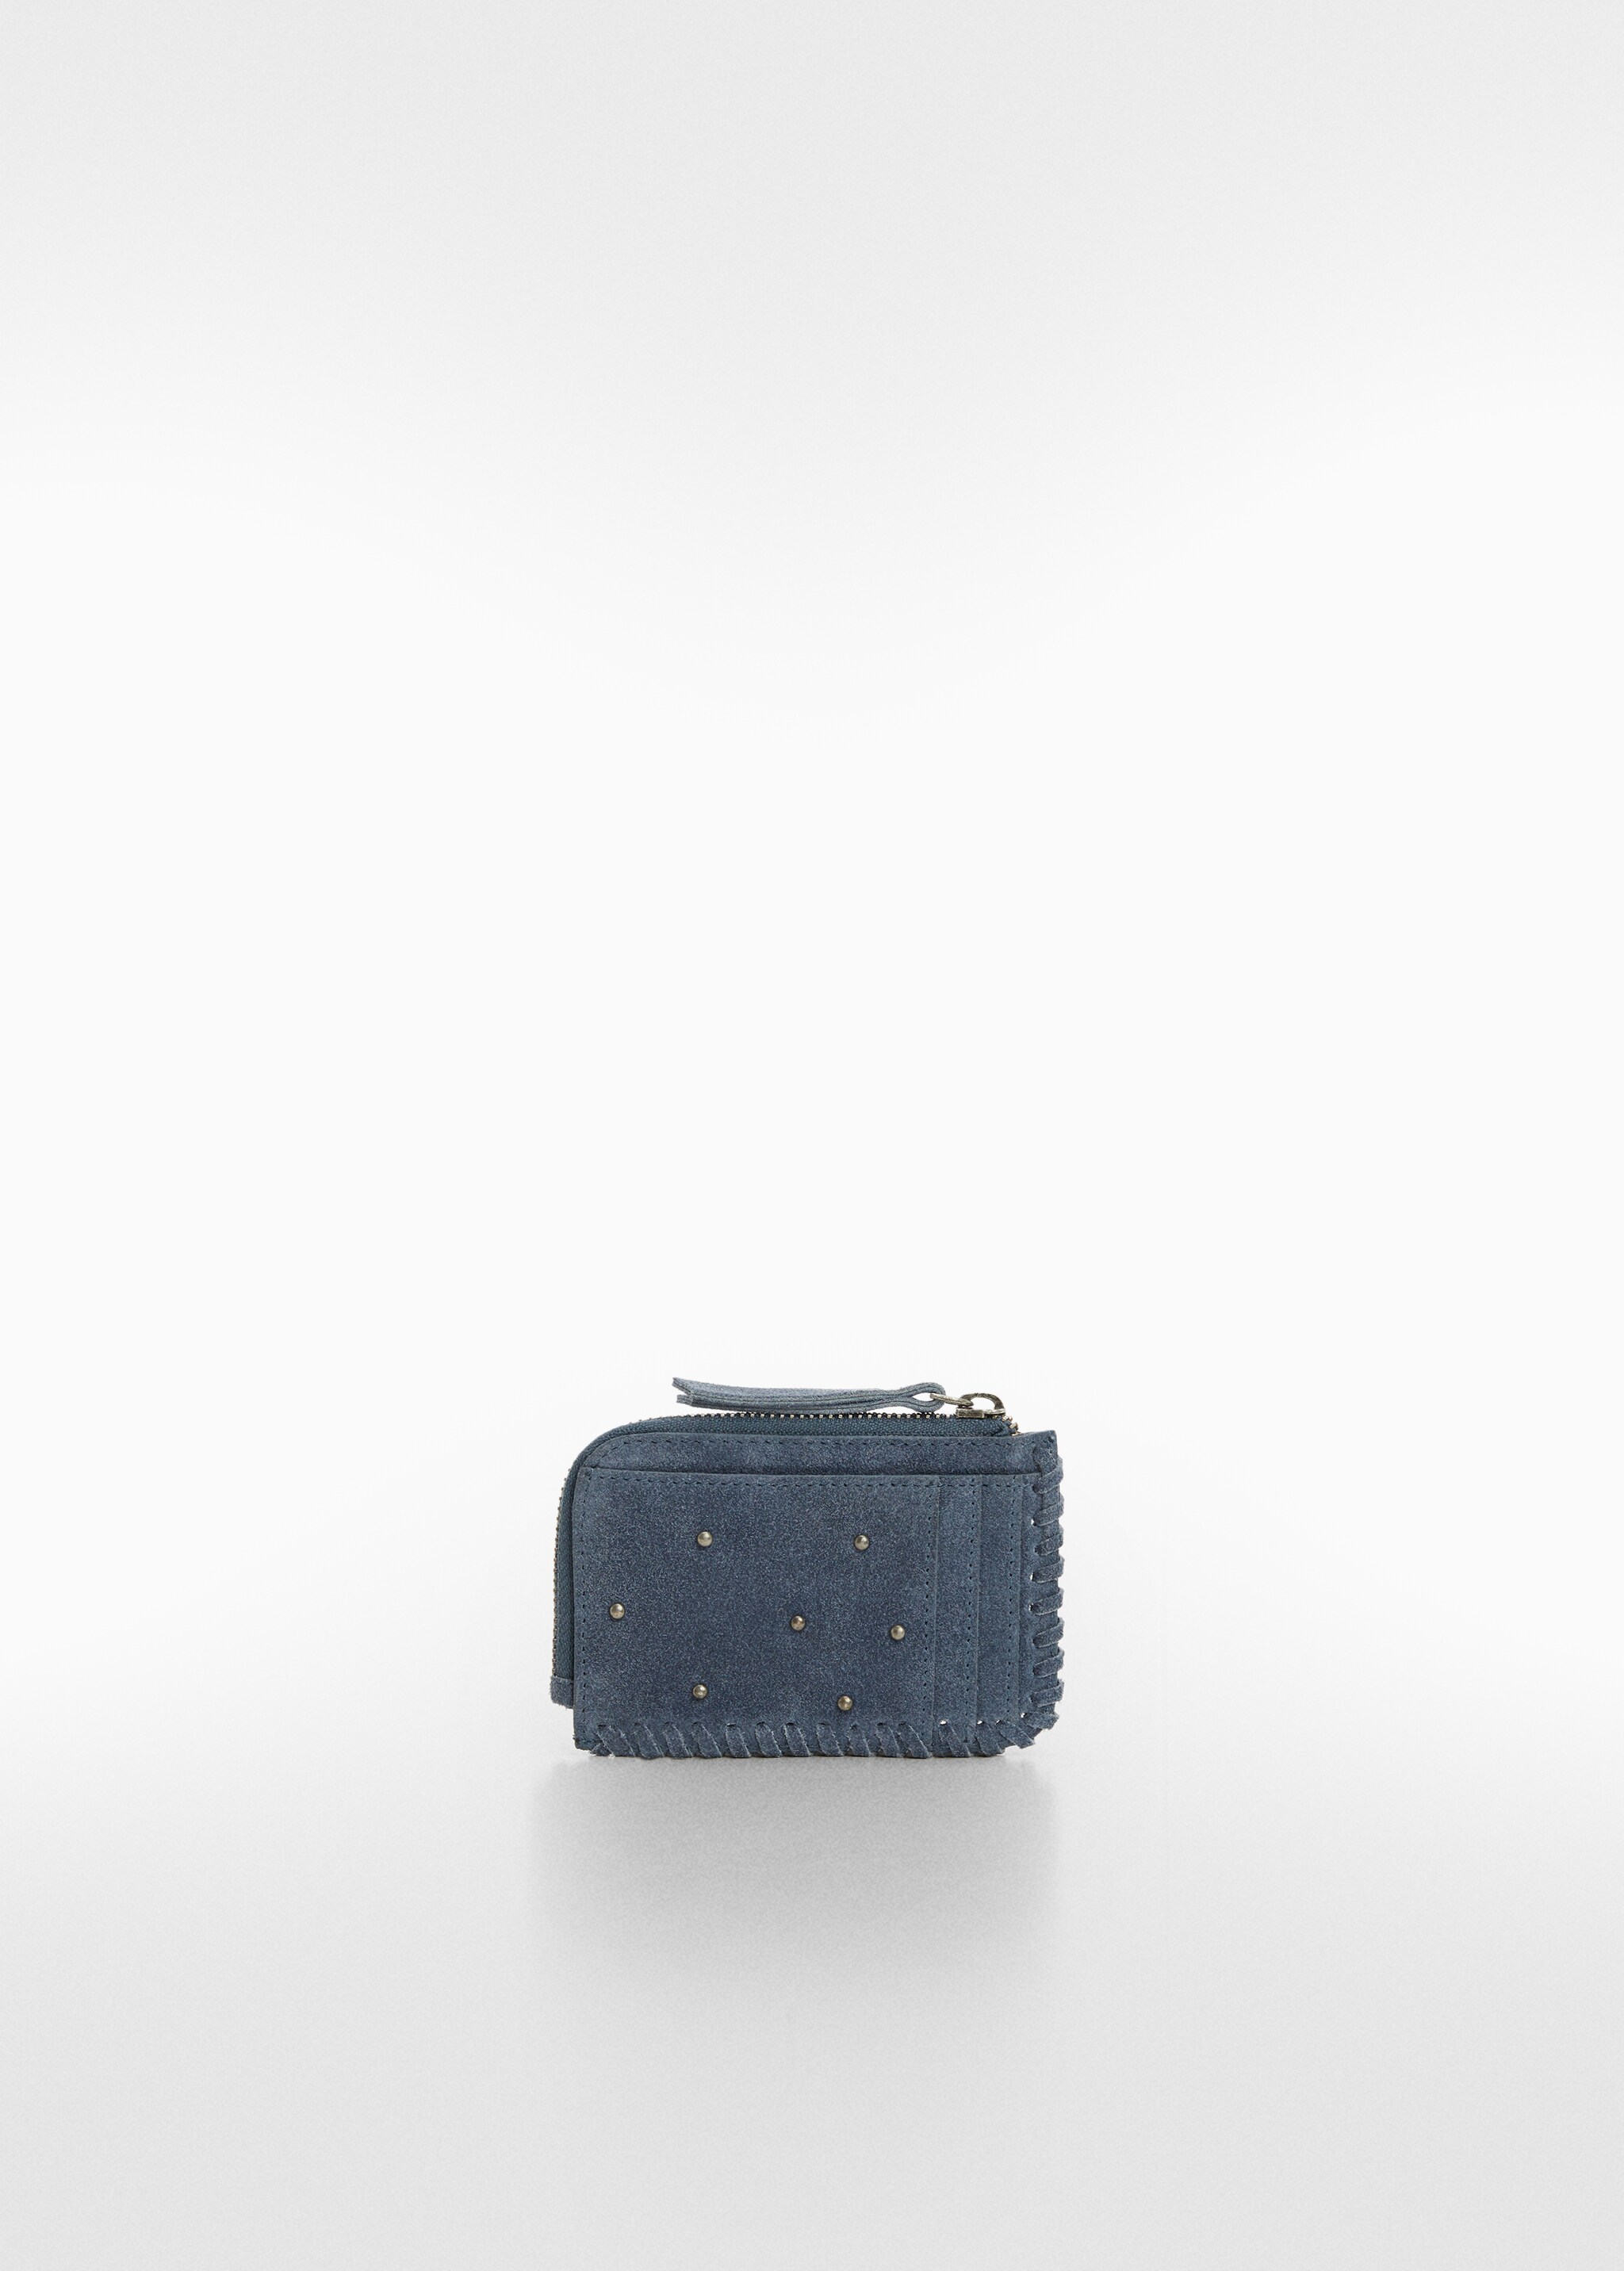 Studded leather purse - Article without model